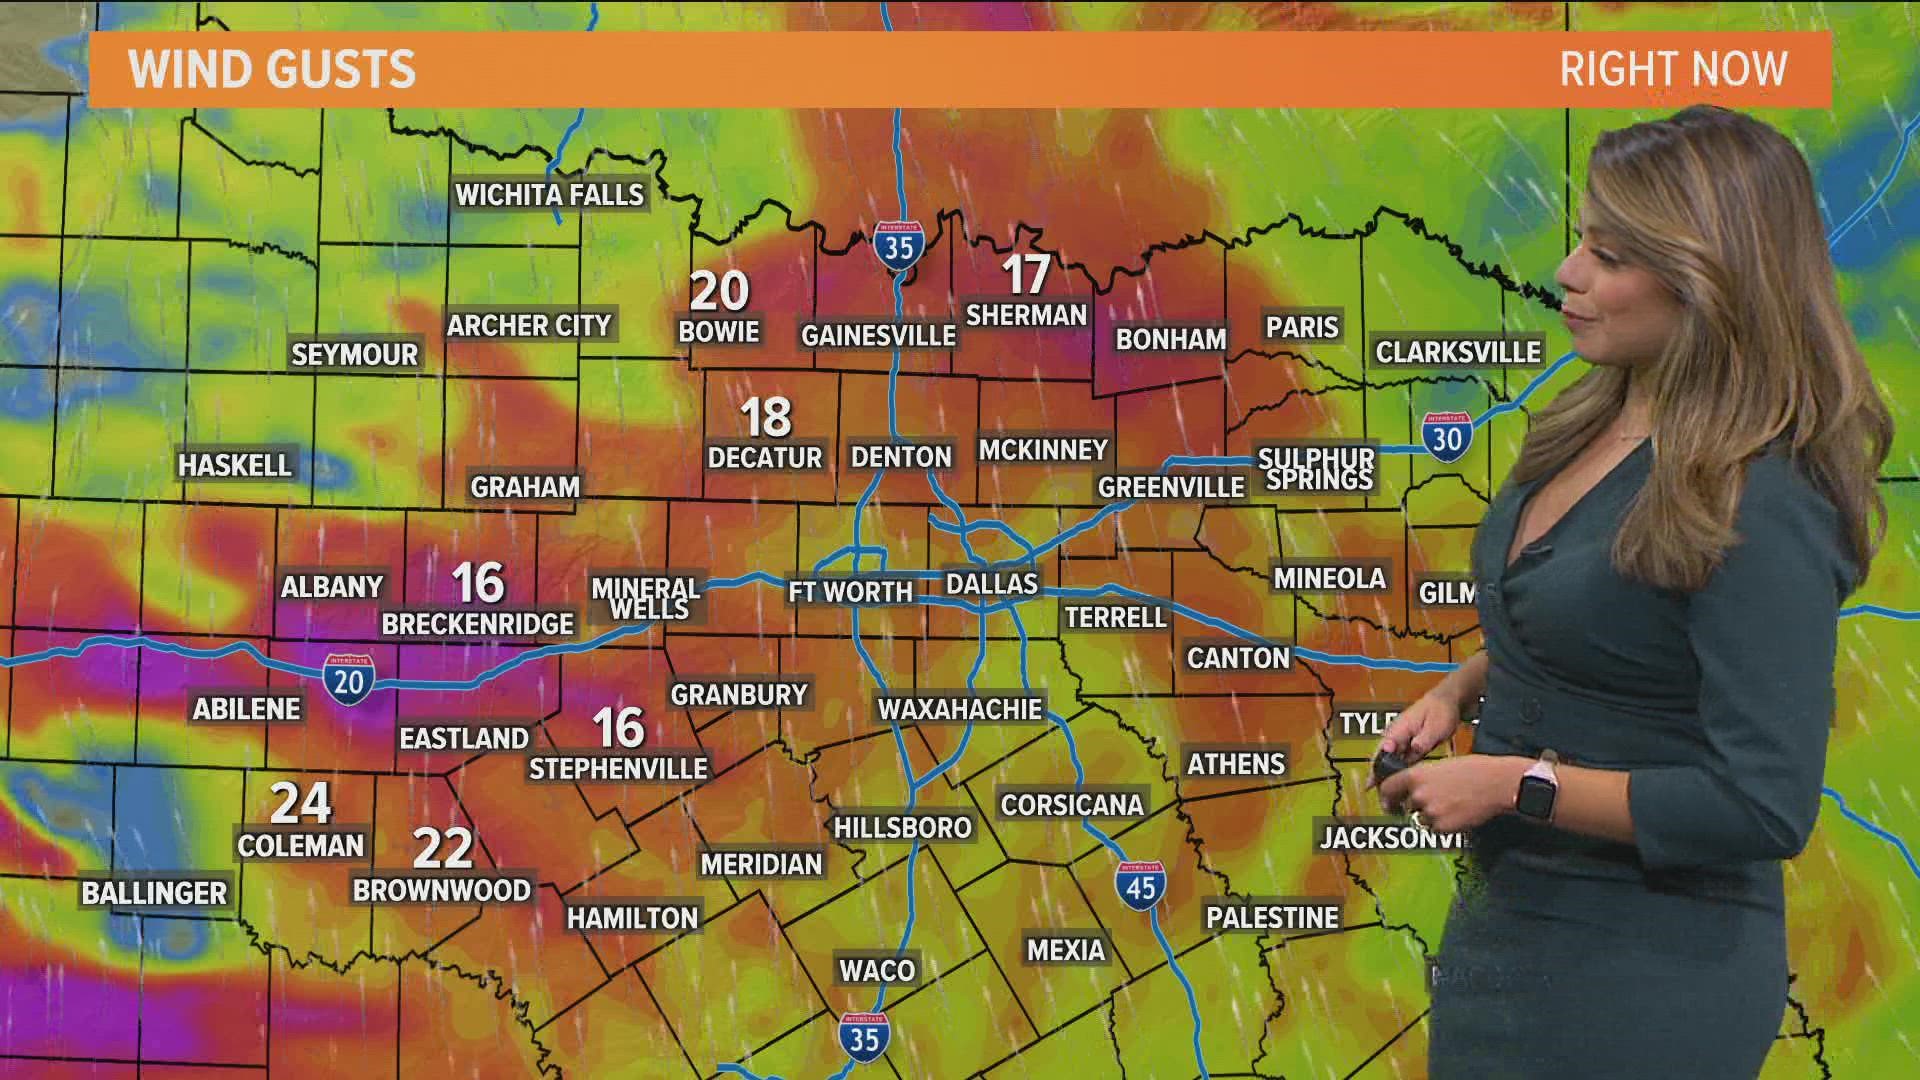 We've consistently seen wind gusts over 20 mph in North Texas.